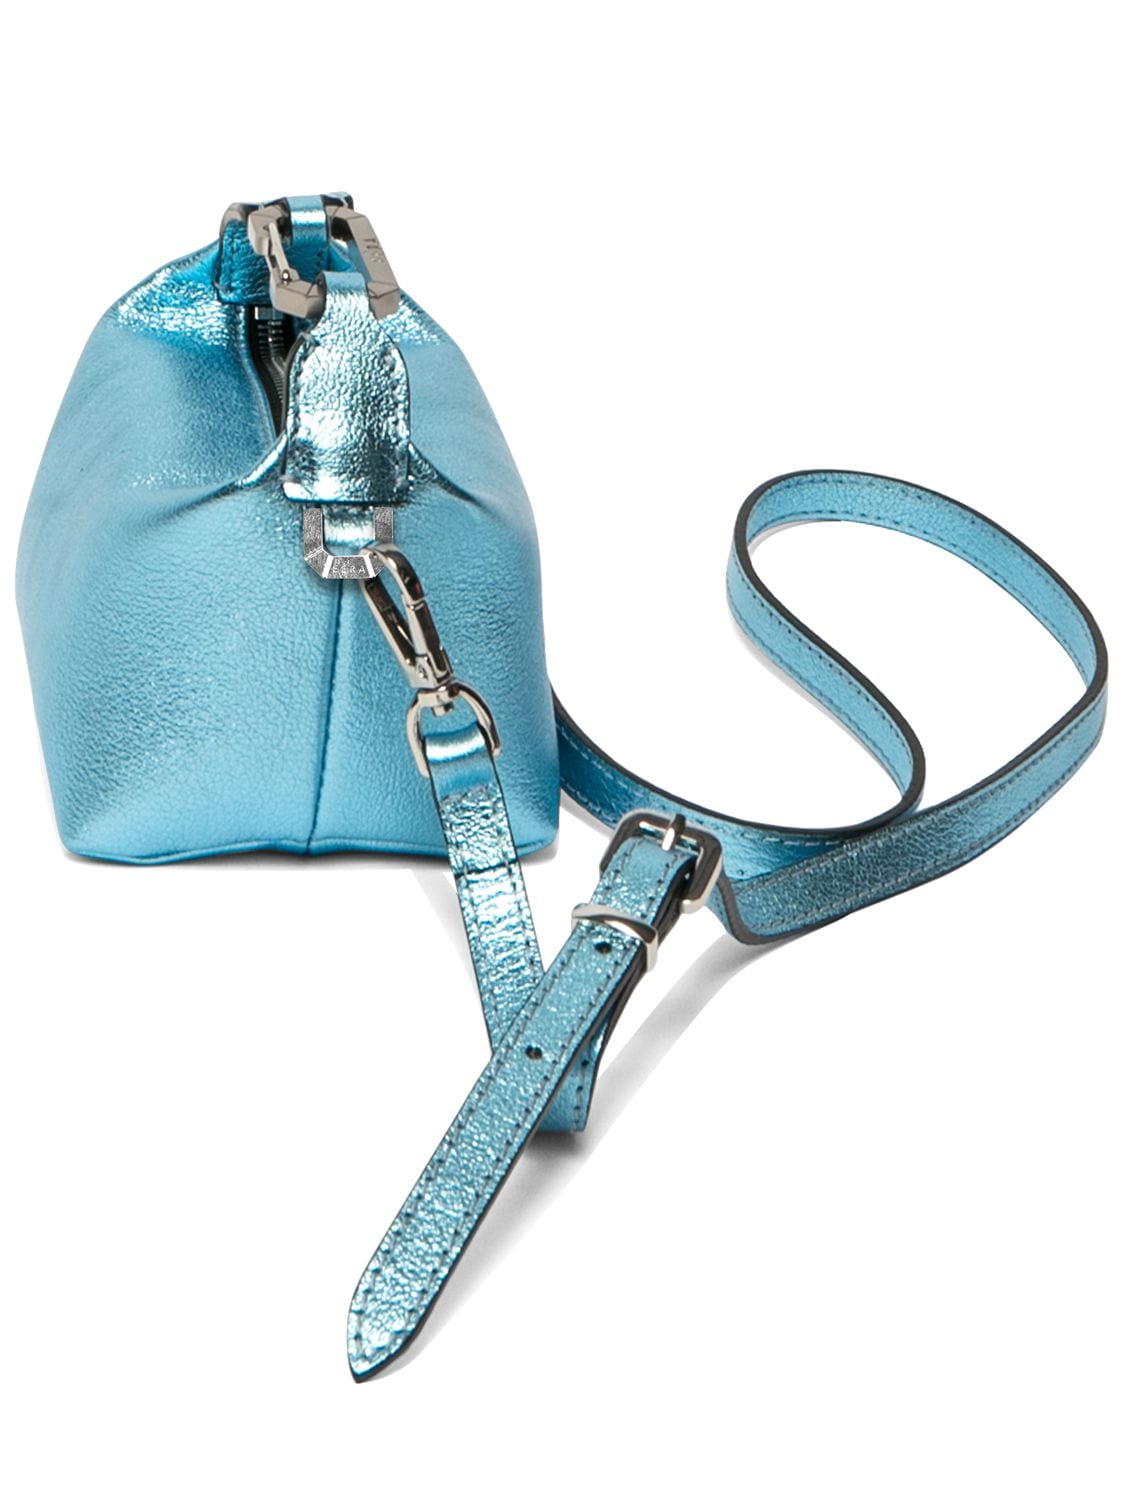 Shop Eéra Tiny Moon Laminated Leather Bag In Turquoise